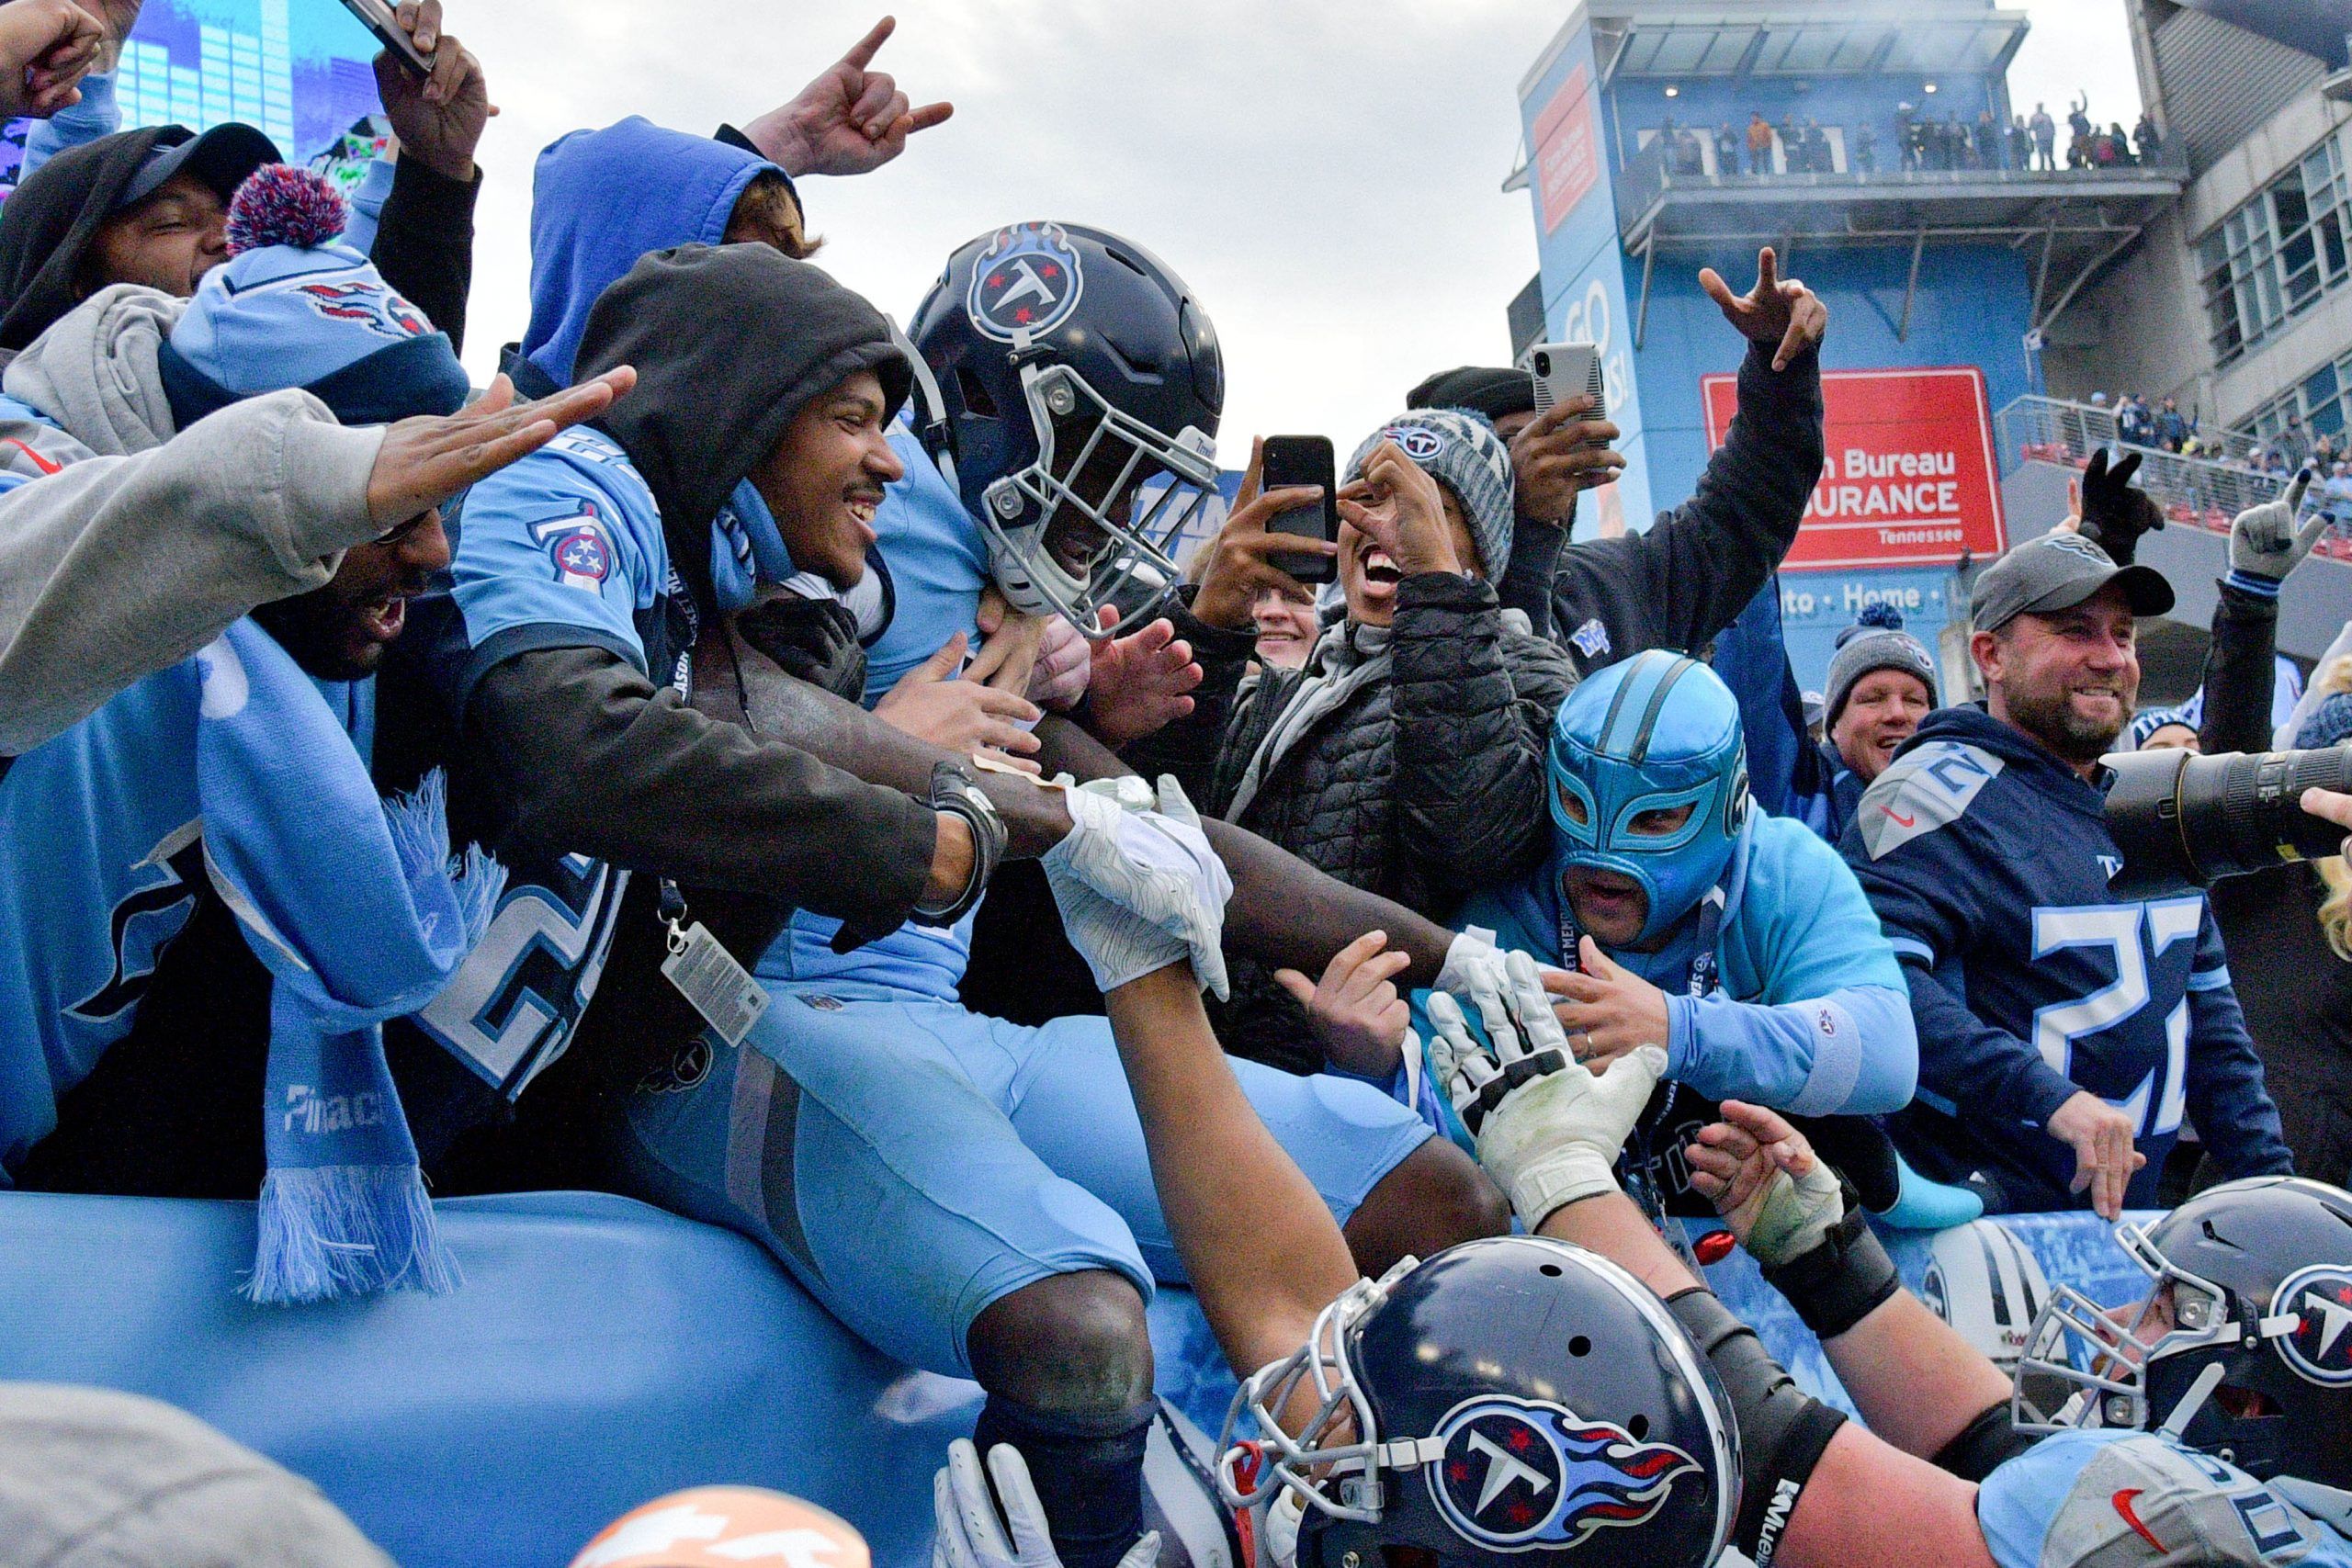 Watching pro sports (whether on TV or up close like these Tennessee Titans fans) can affect viewers at a hormonal level.